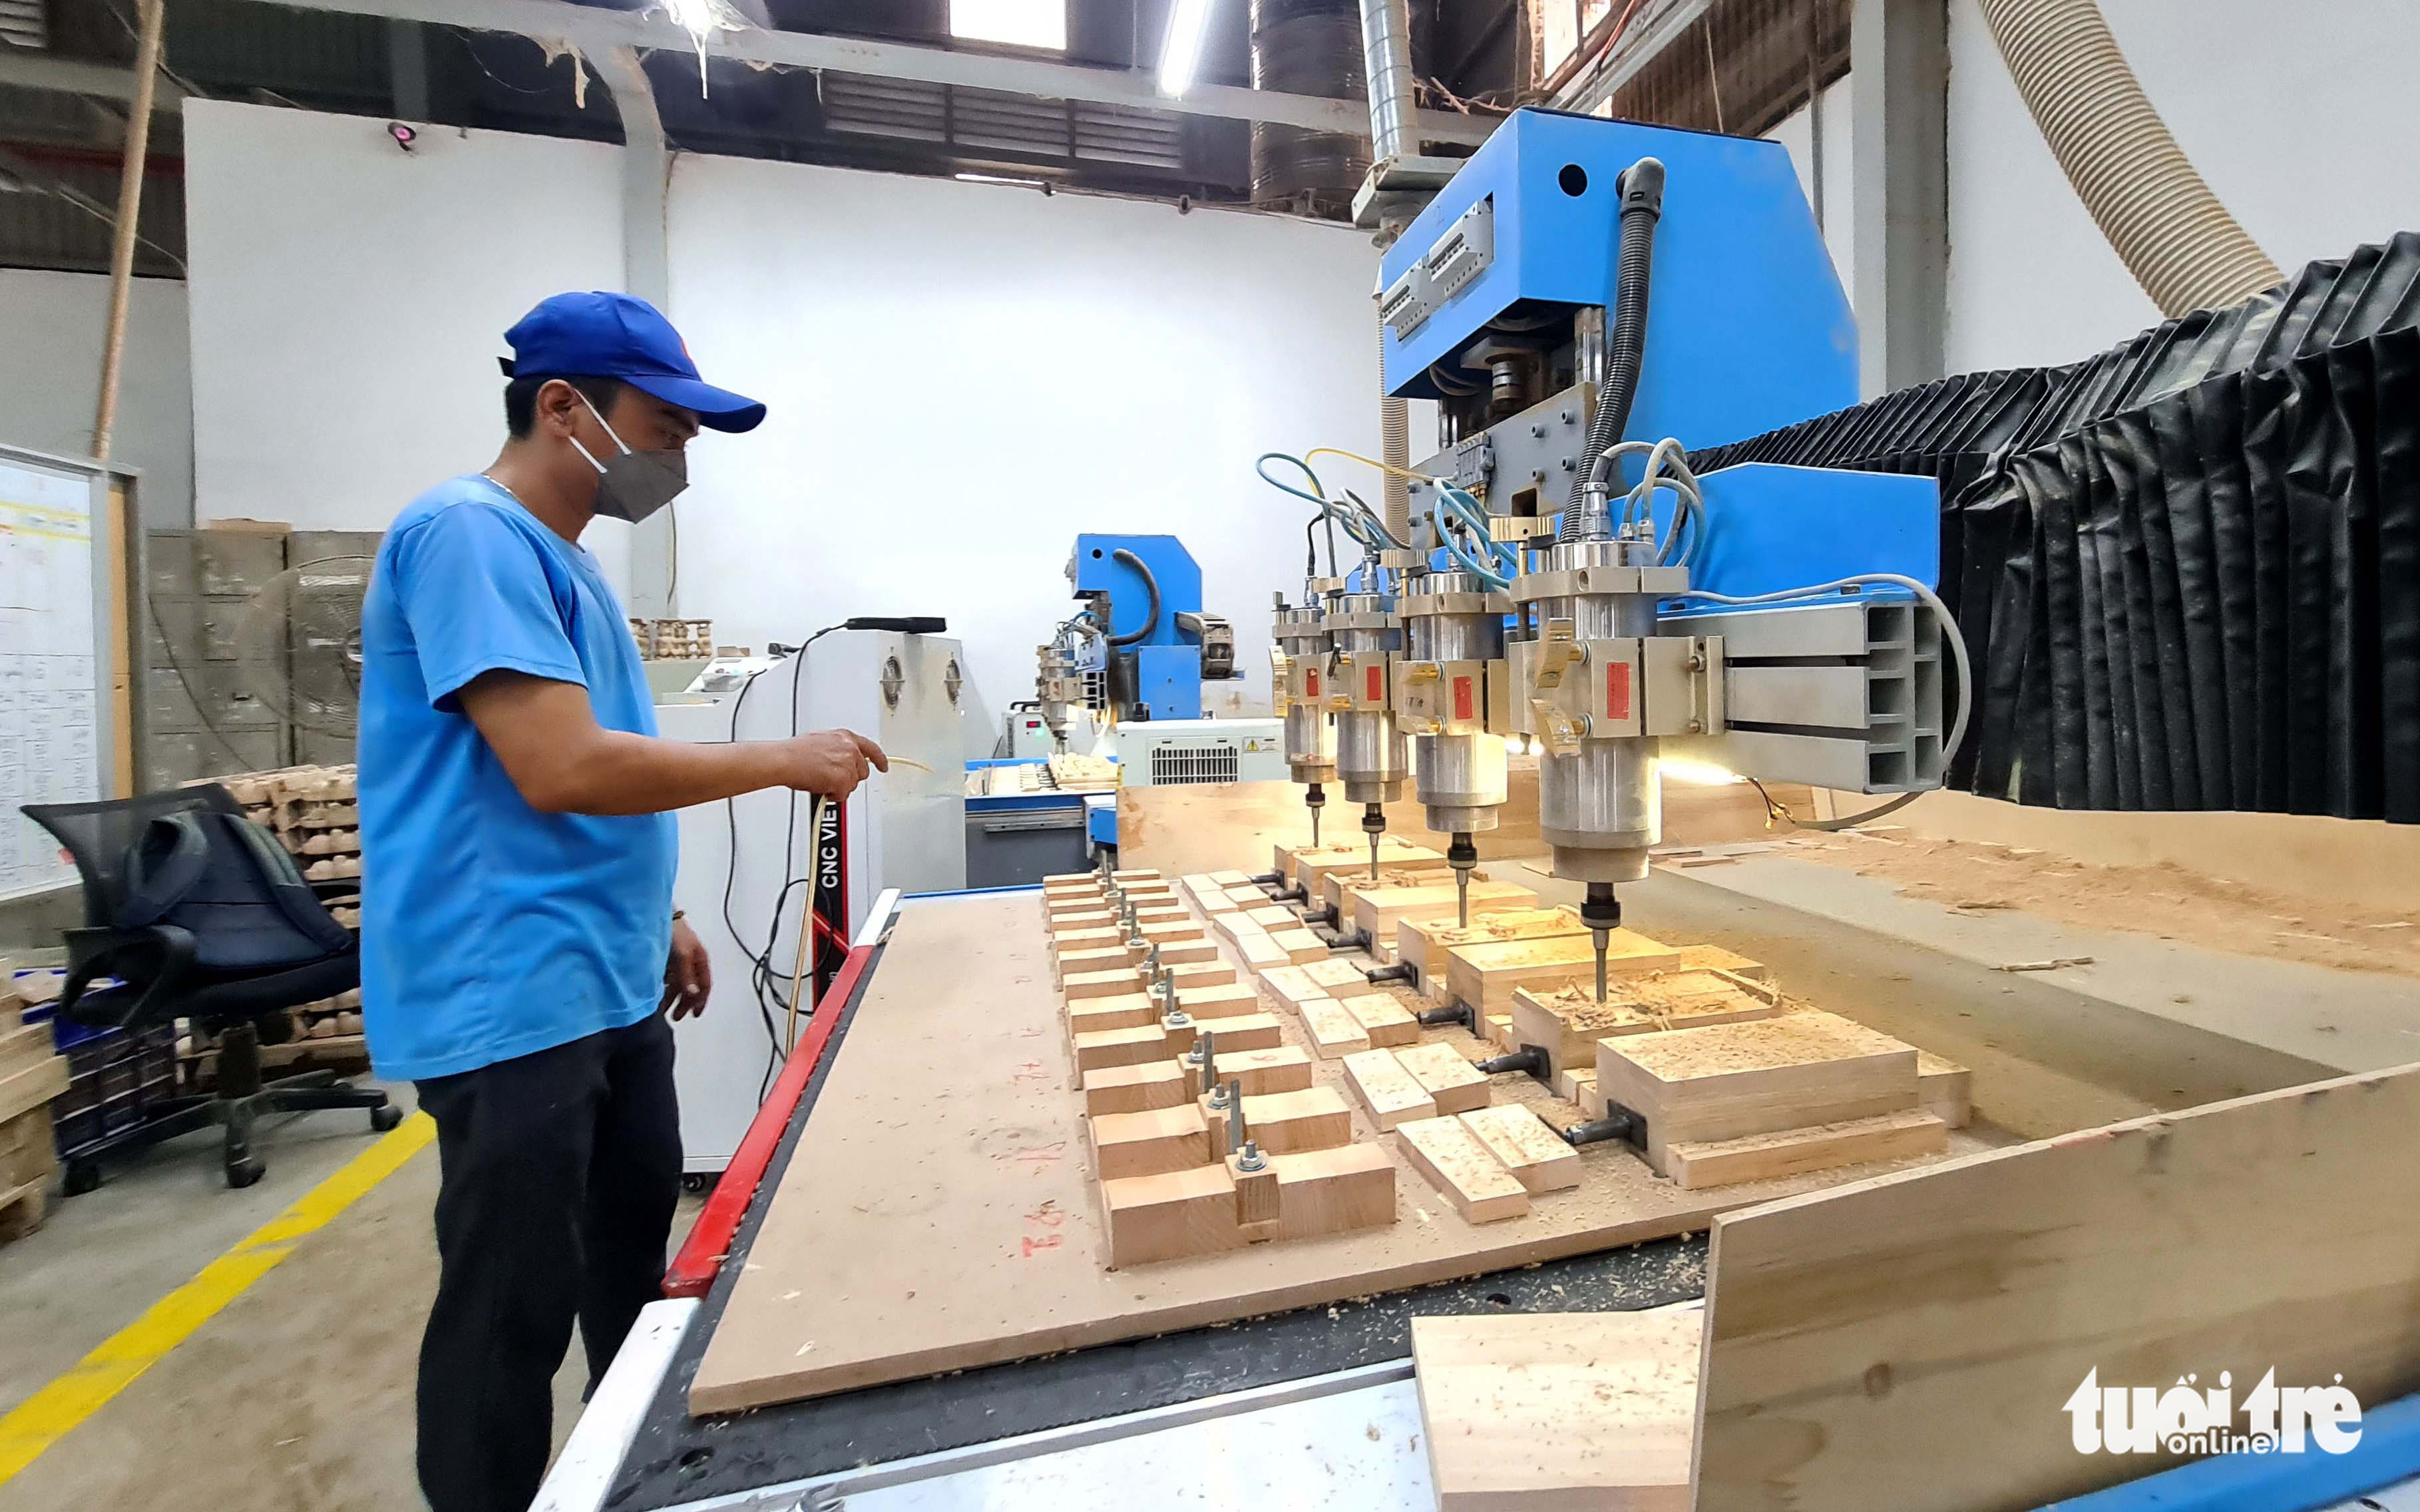 Ho Chi Minh City factories in full swing to finish Christmas production orders